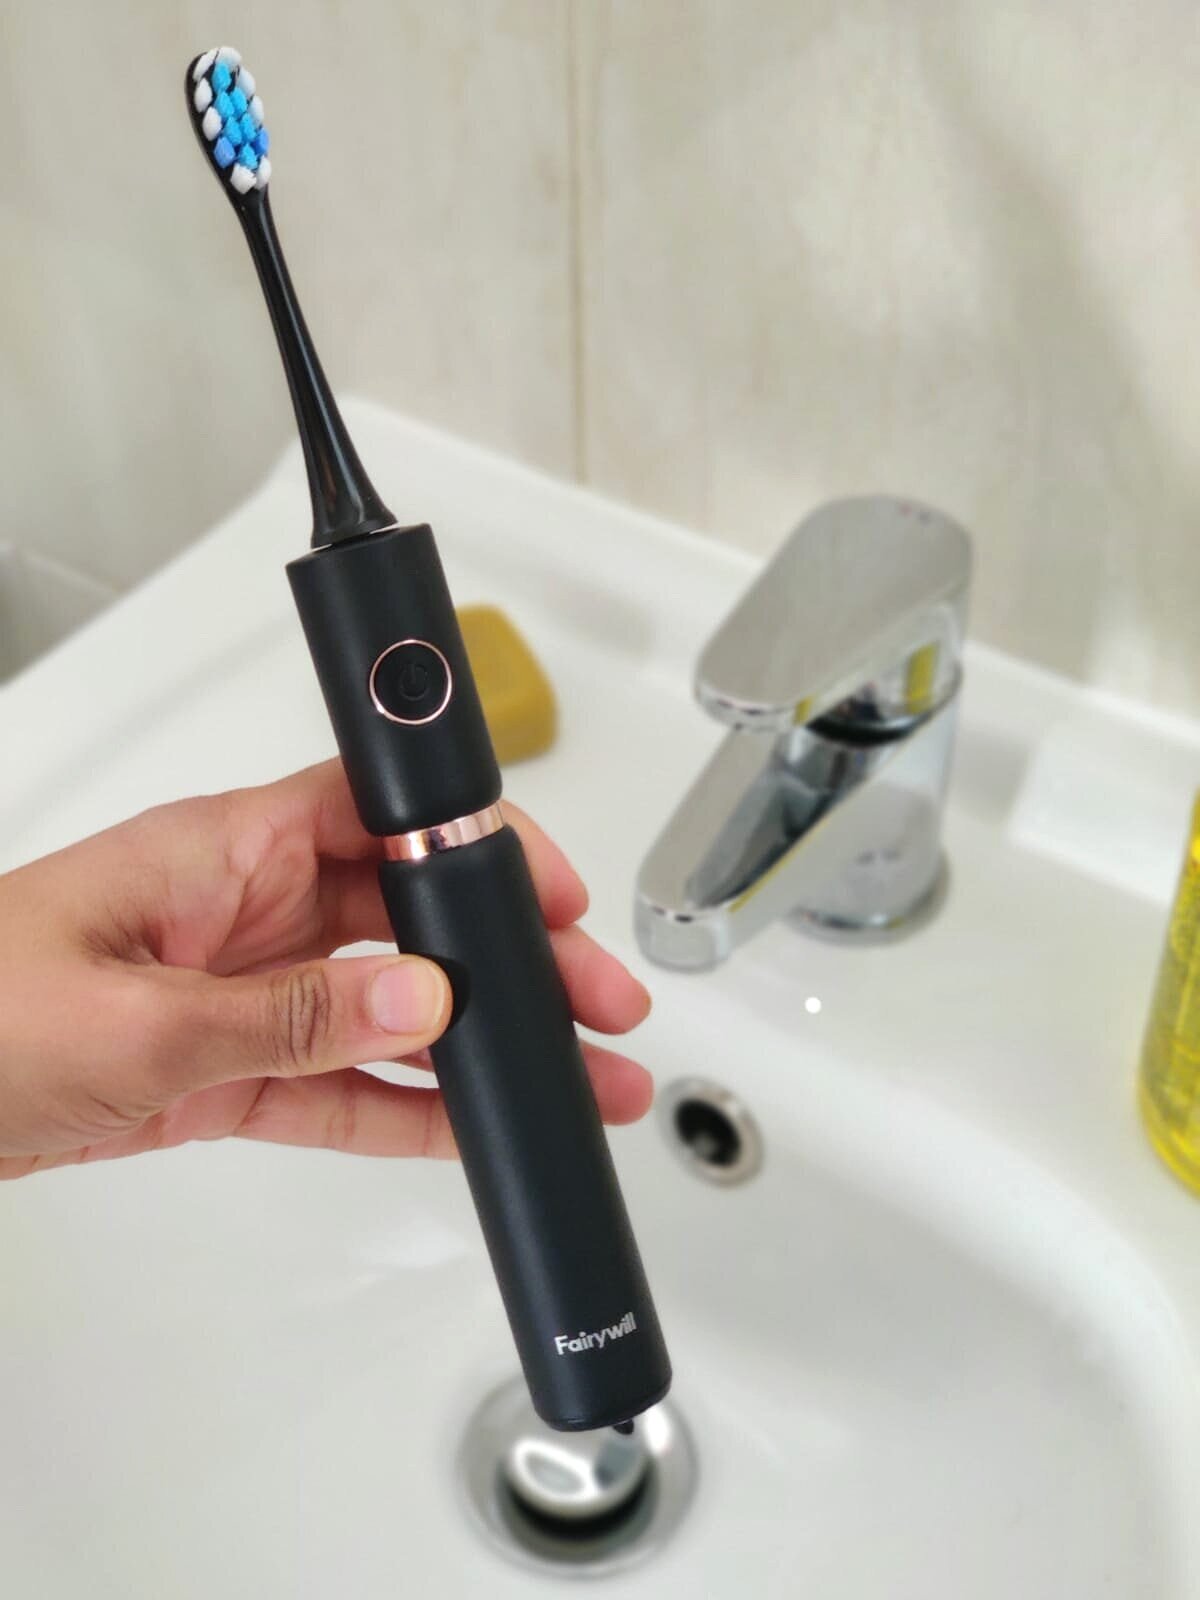 Fairywill P11 Plus Sonic Electric Toothbrush